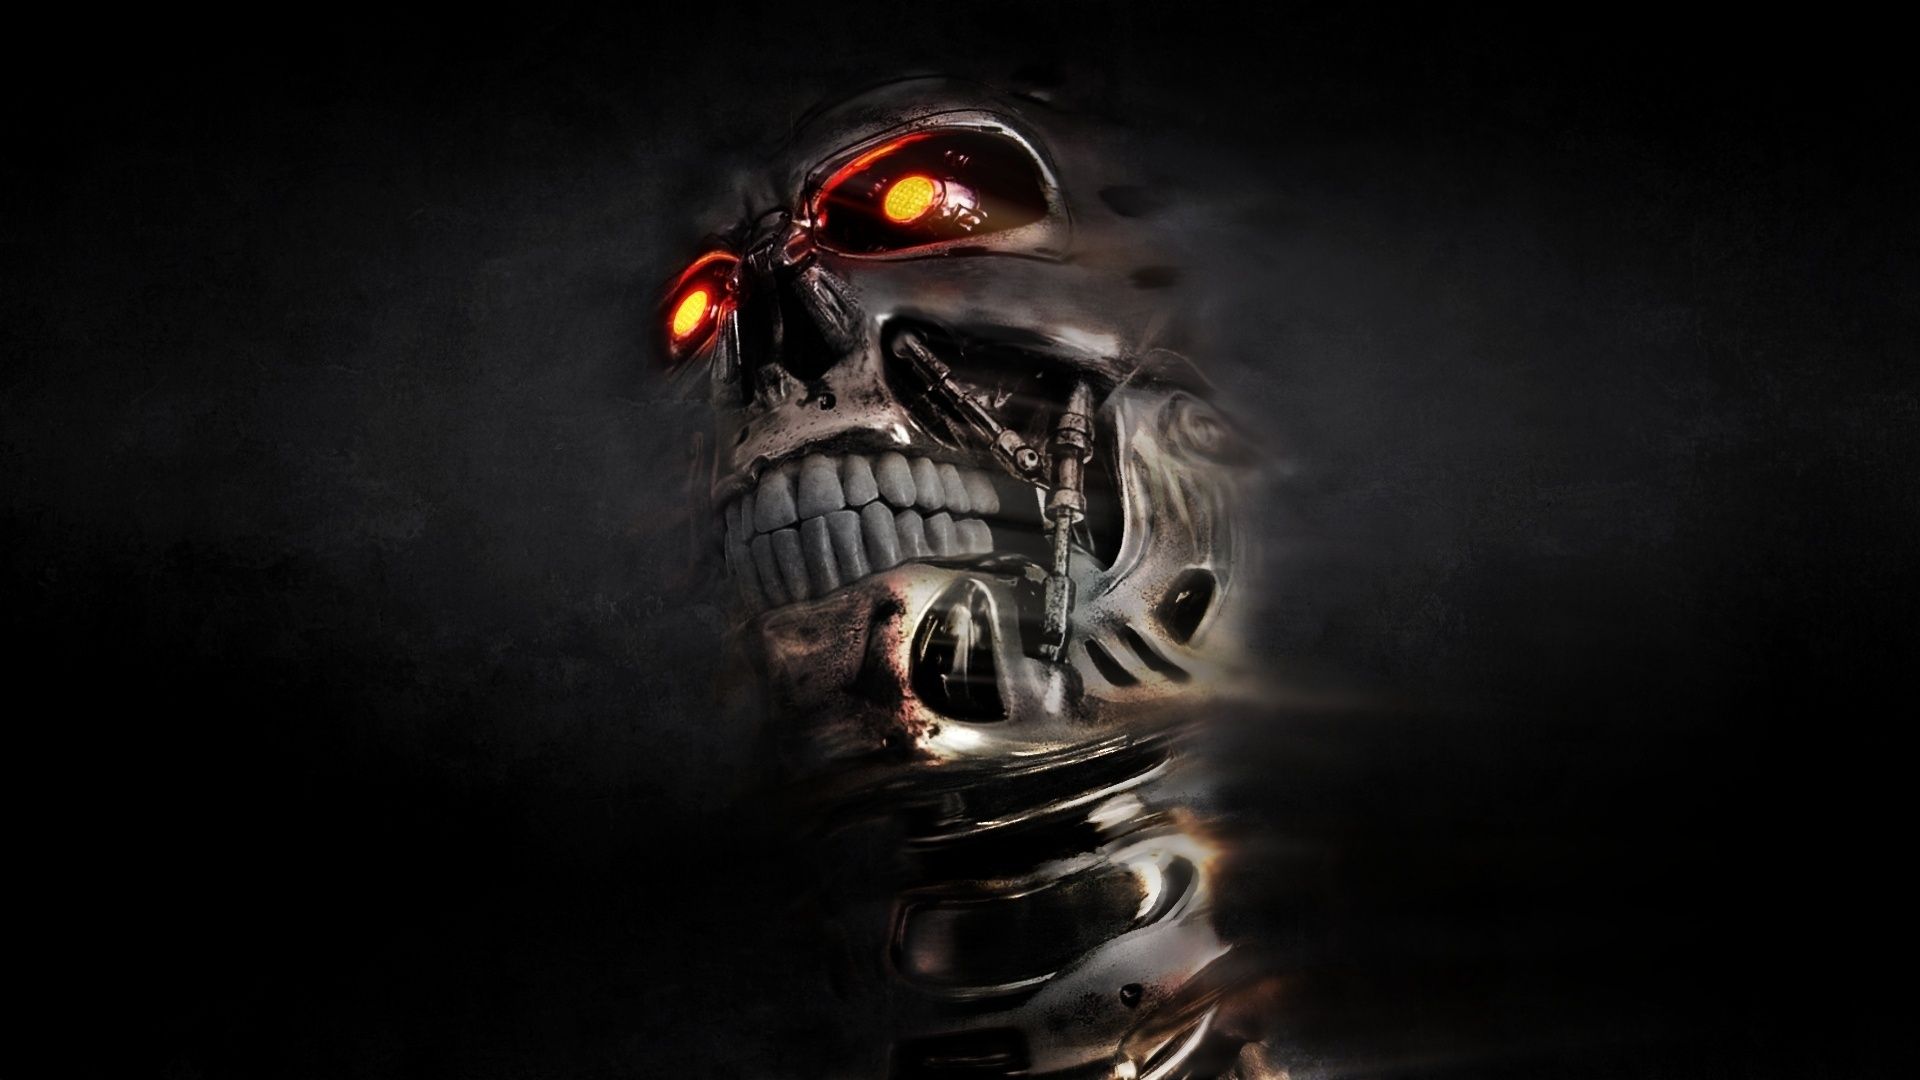 Skull Wallpapers High Quality | Download Free